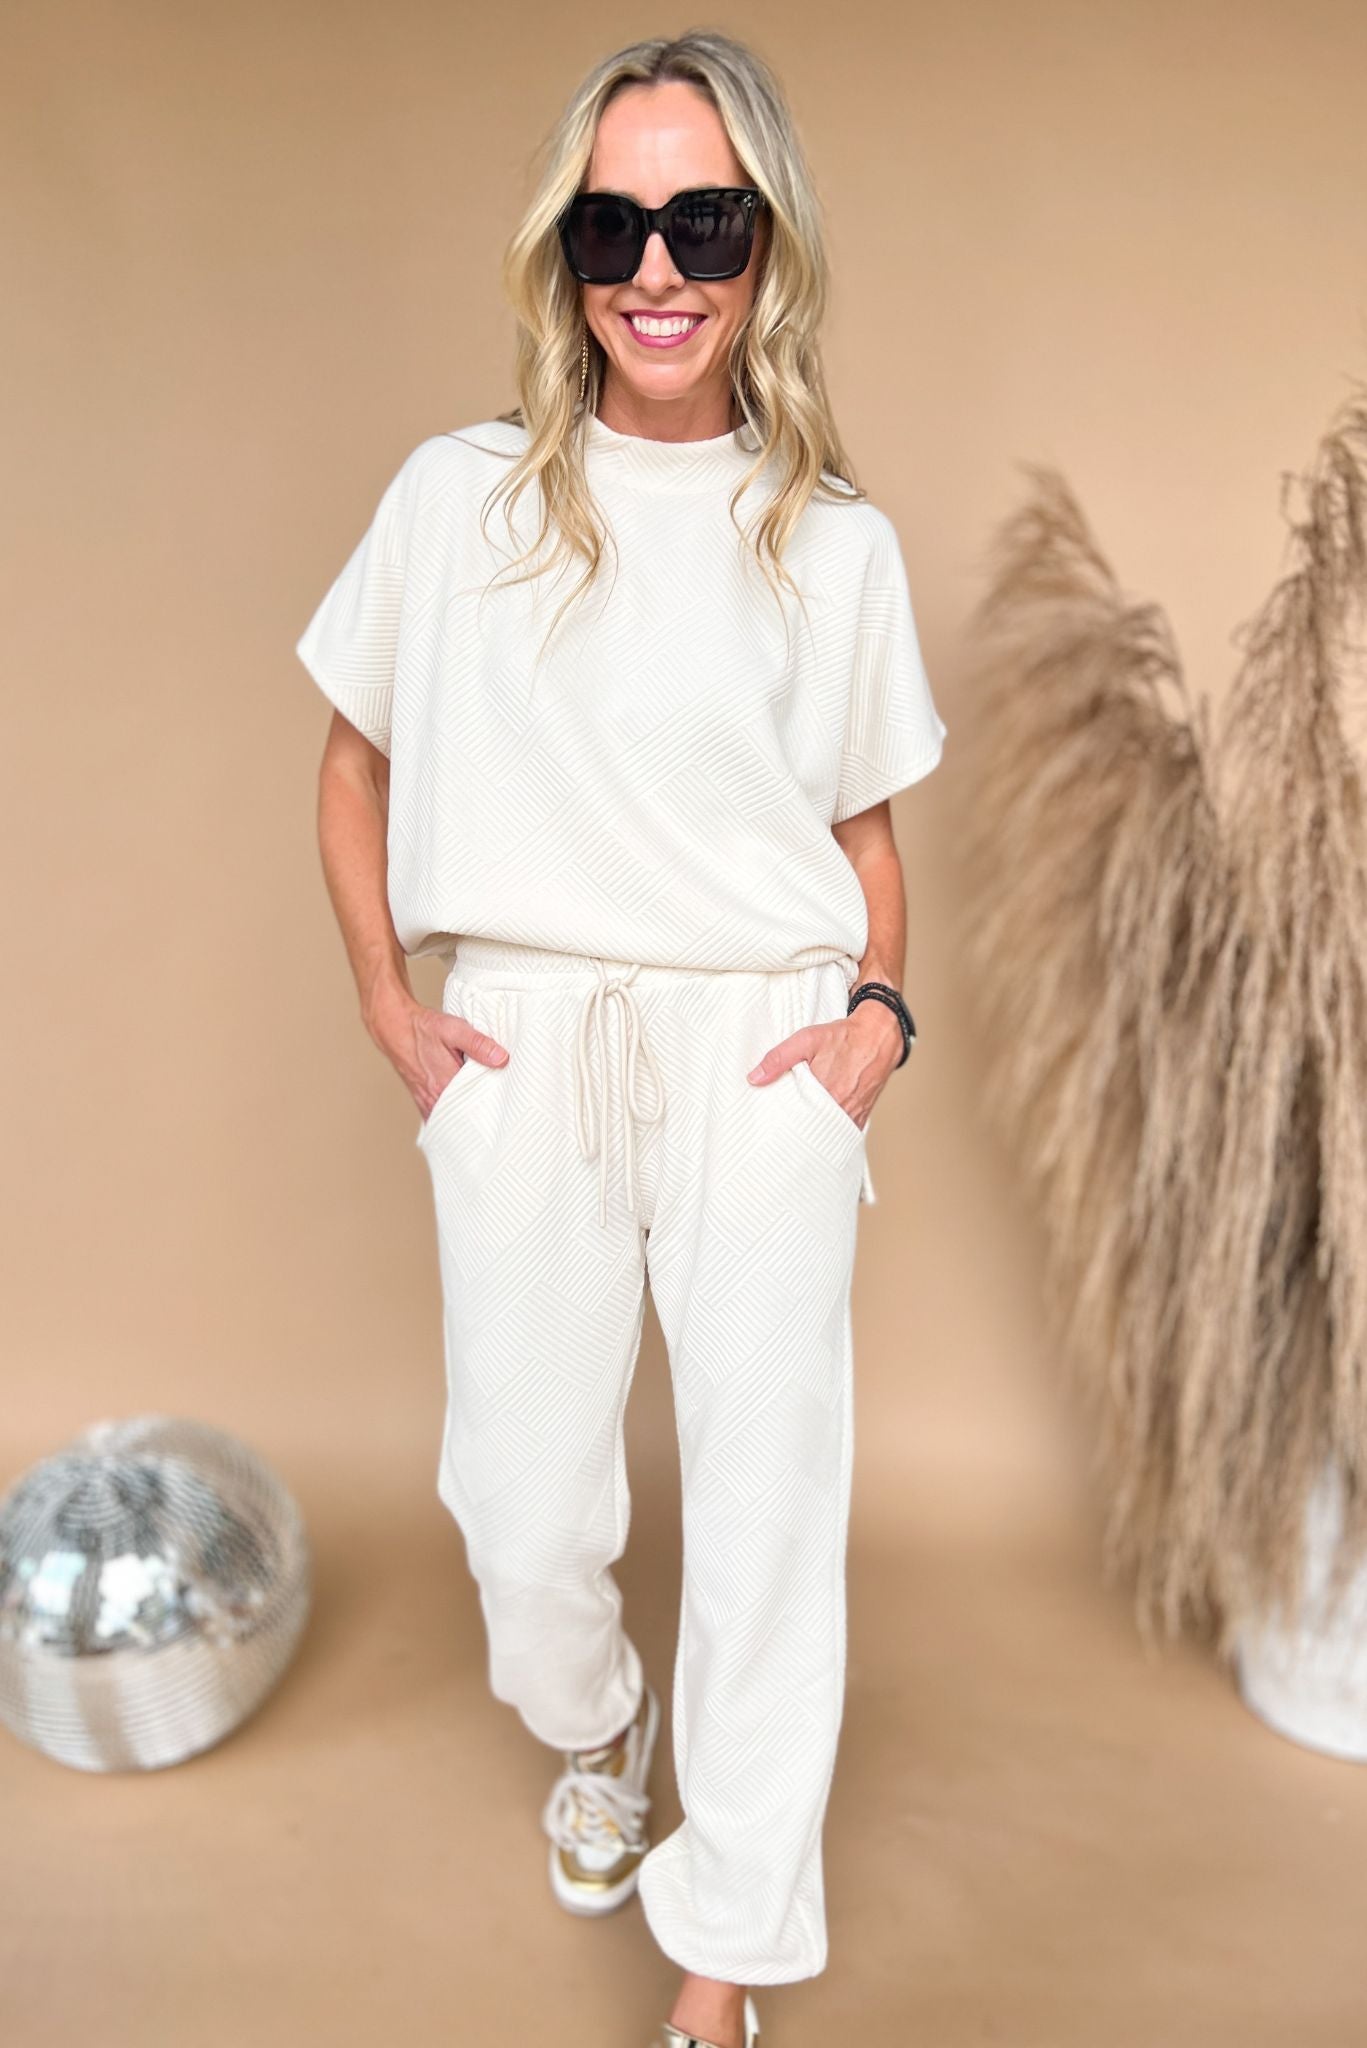 Load image into Gallery viewer, Cream Textured Drop Shoulder Joggers Pants Set, lounge set, everyday wear, mom style, chic, trendy set, shop style your senses by mallory ftizsimmons
